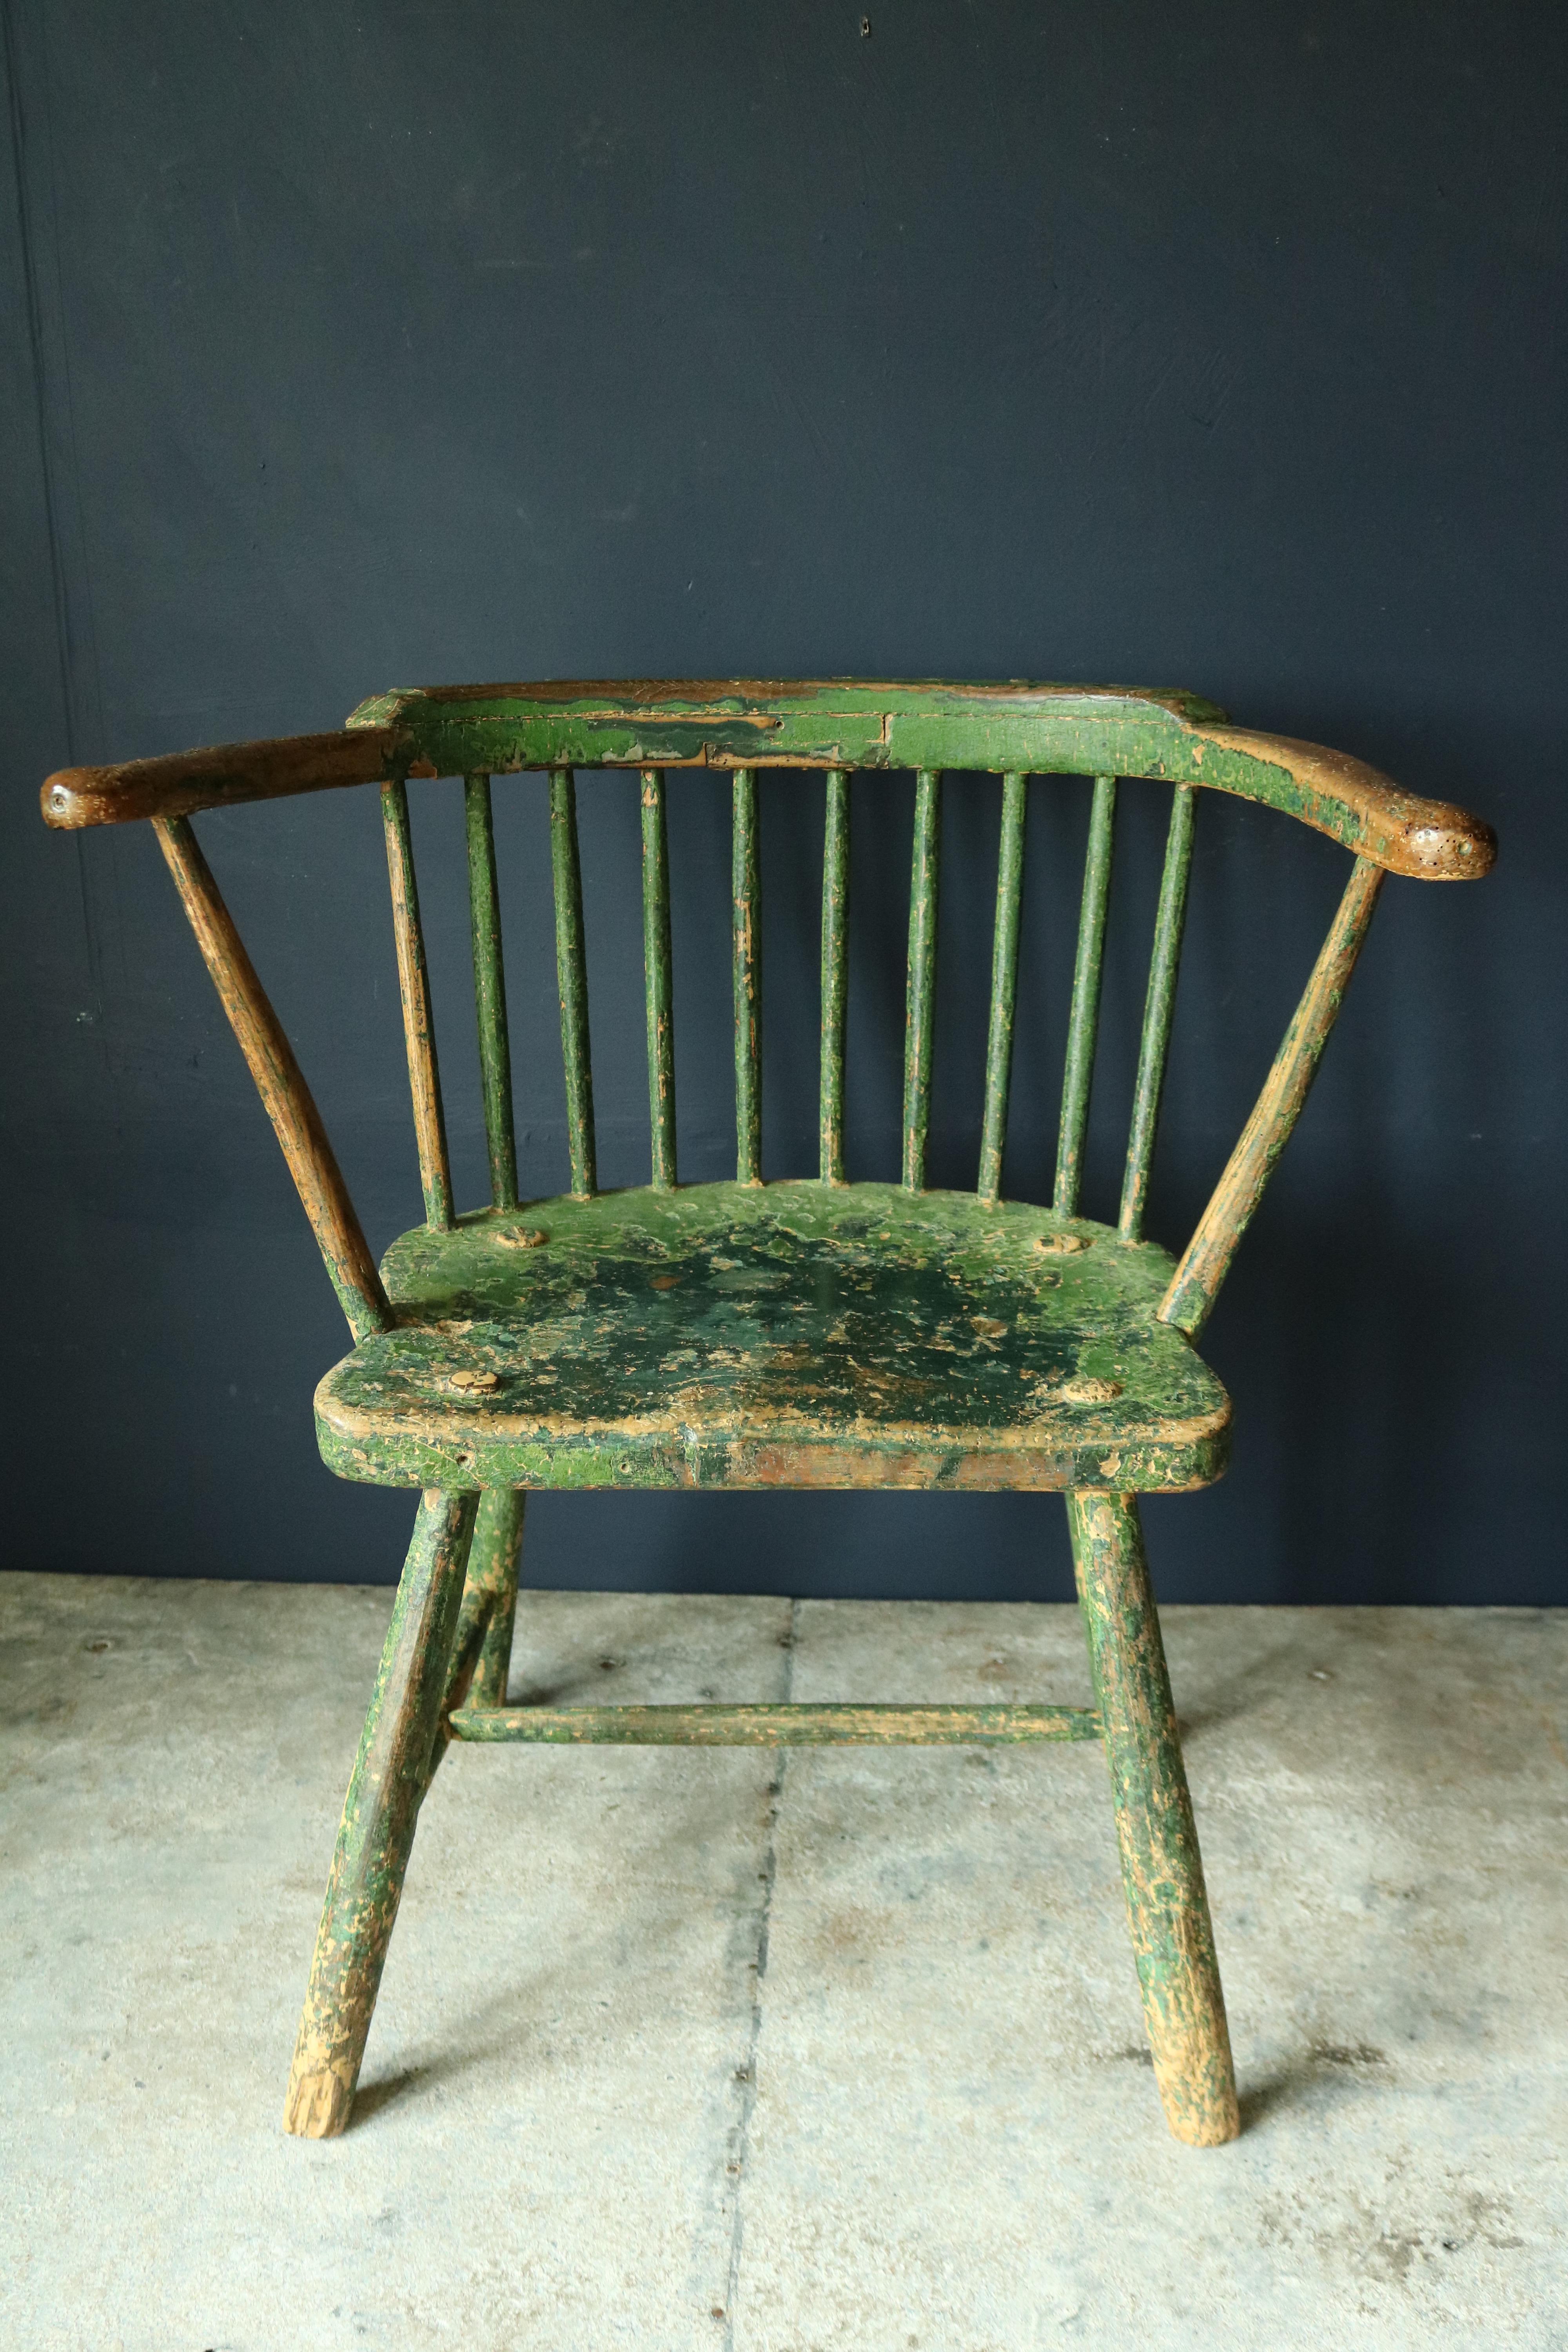 Primitive Early 19th Century Welsh Stick Chair 2